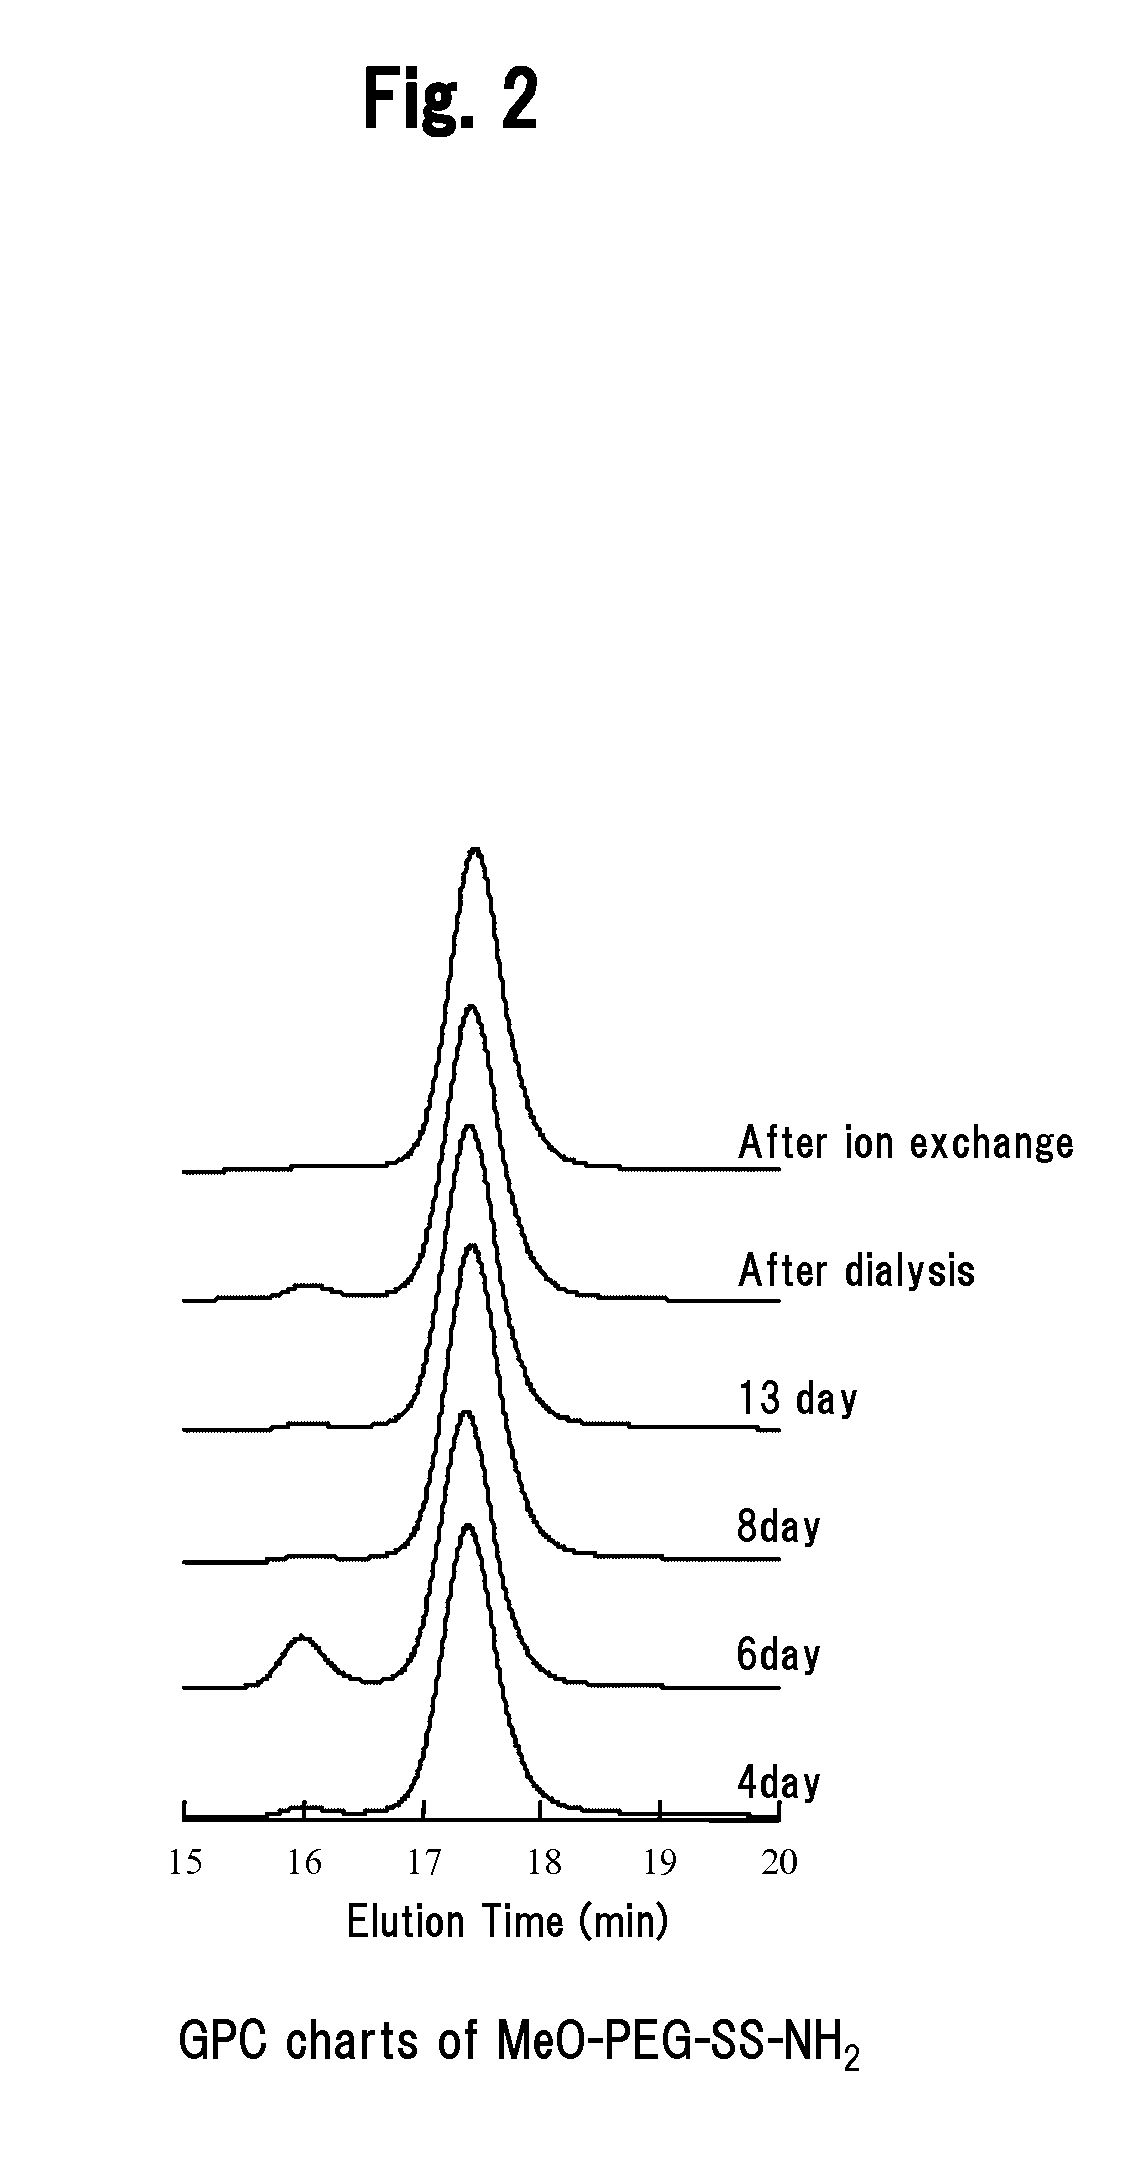 Polymer micelle complex including nucleic acid